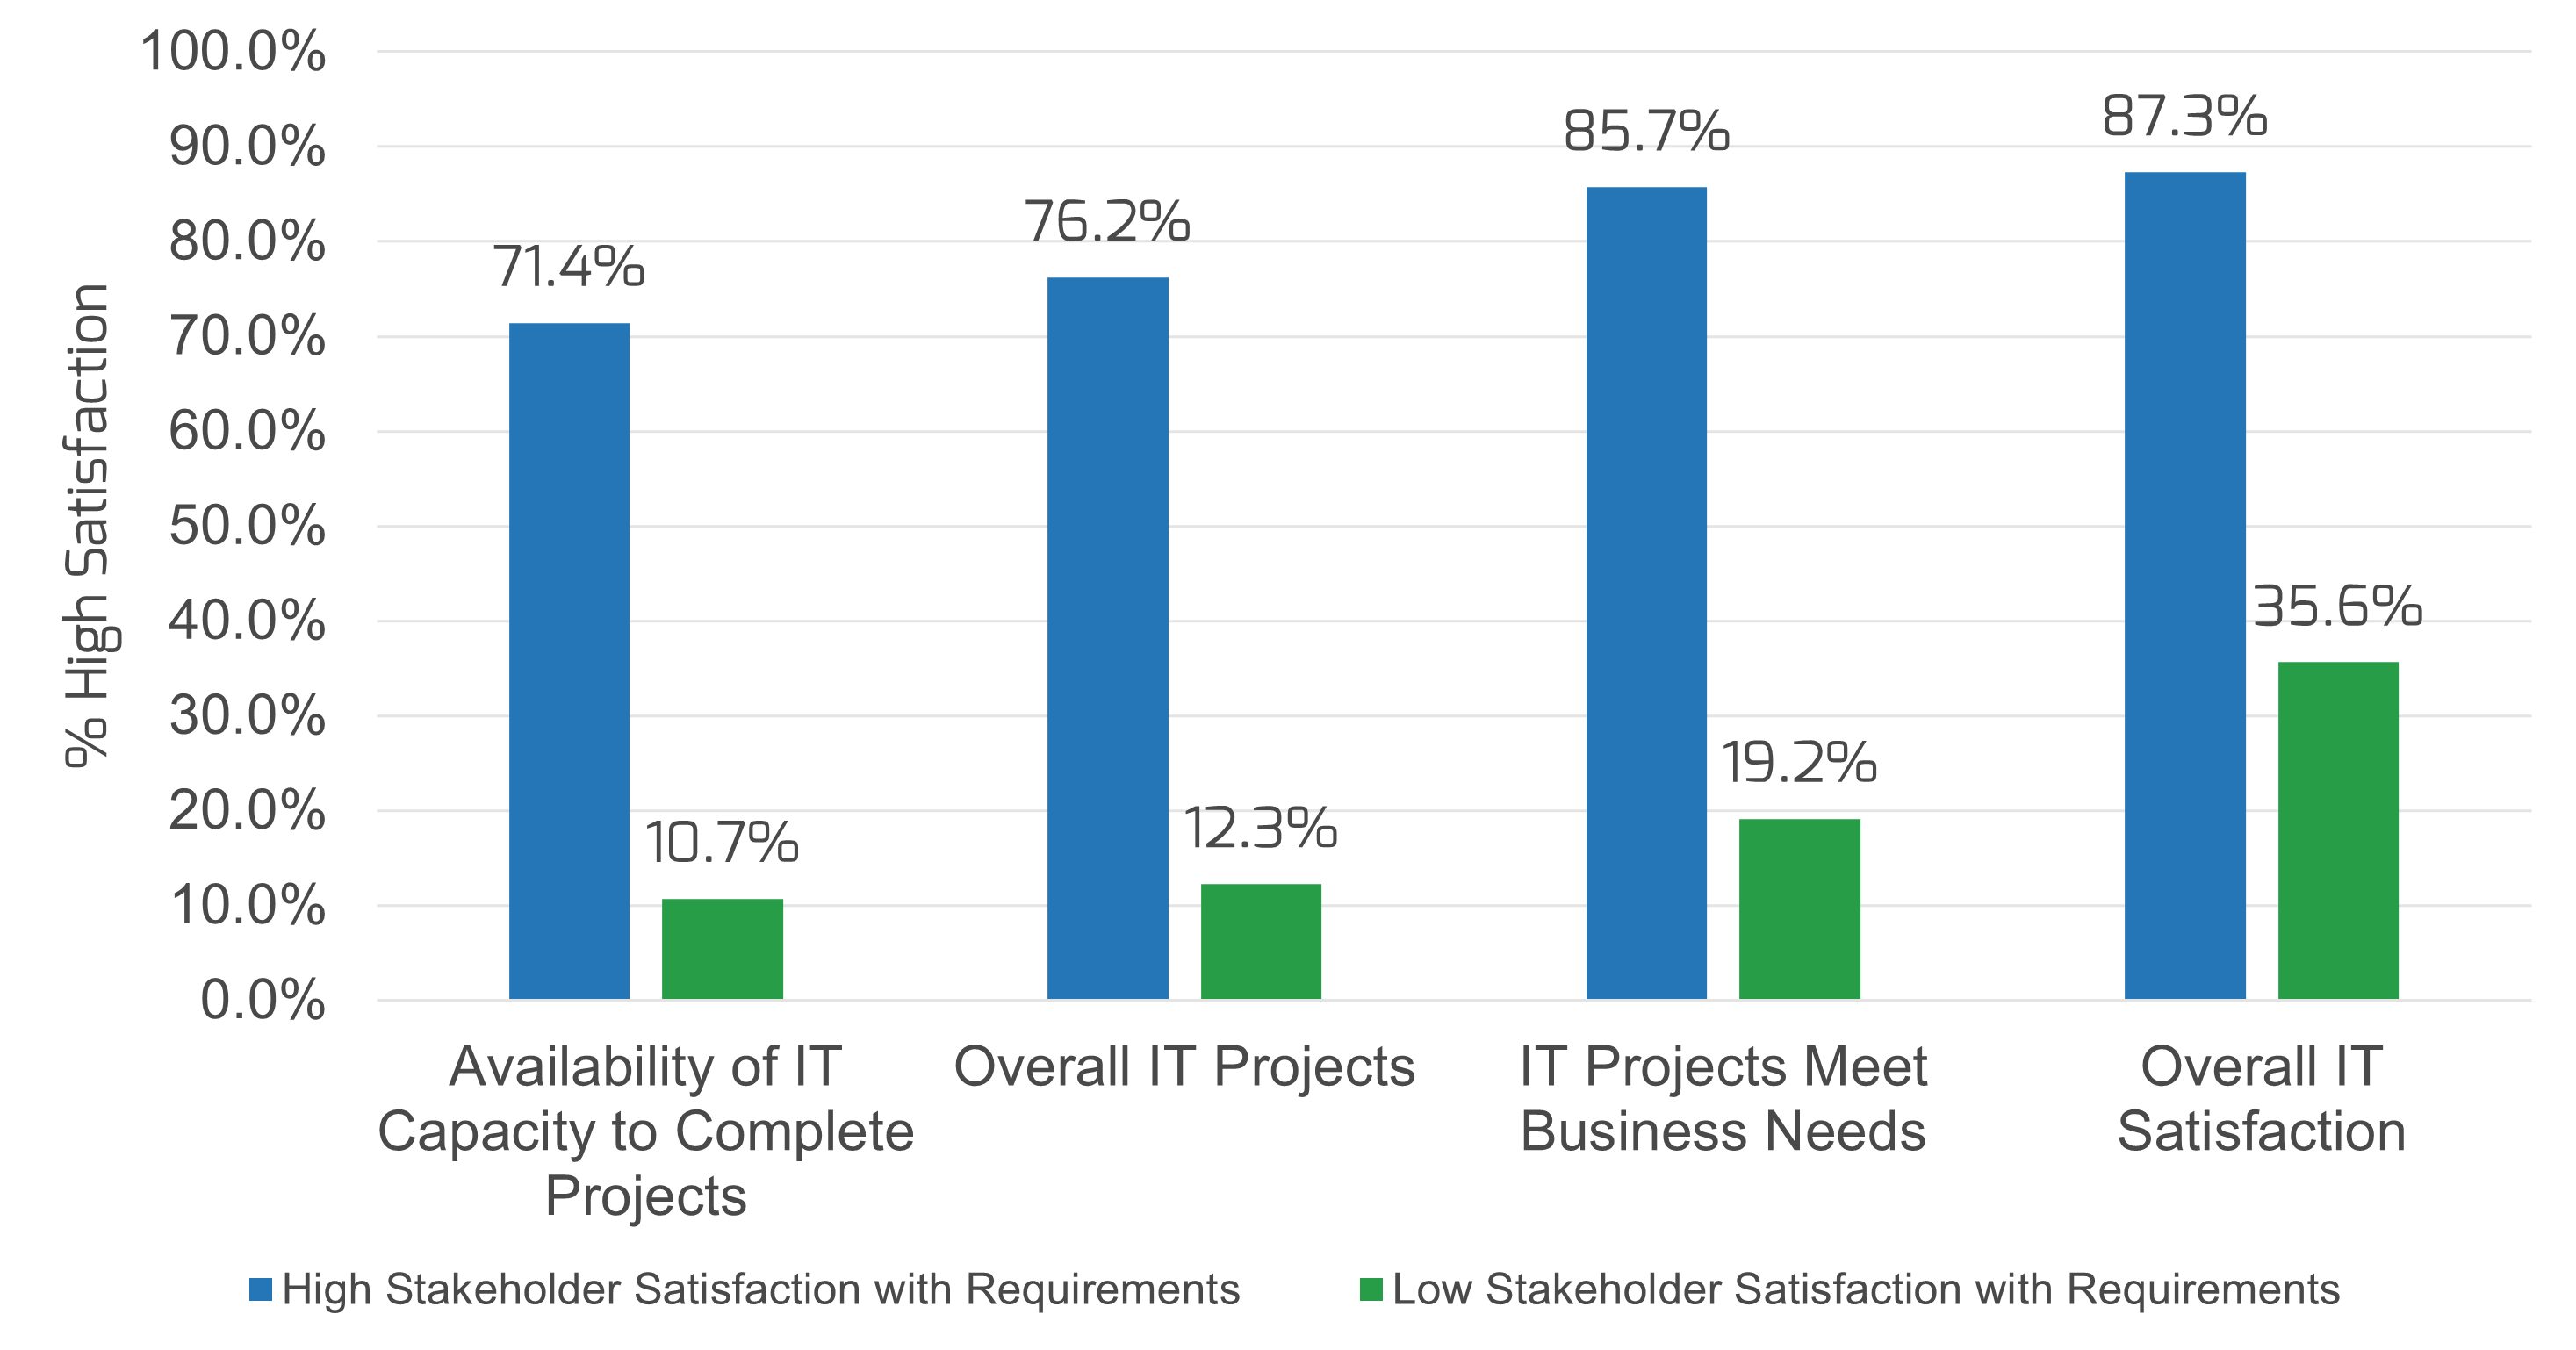 This is an image of a bar graph comparing the percentage of respondents with high stakeholder satisfaction, to the percentage of respondents with low stakeholder satisfaction for four different categories.  these include: Availability of IT Capacity to Complete Projects; Overall IT Projects; IT Projects Meet Business Needs; Overall IT Satisfaction